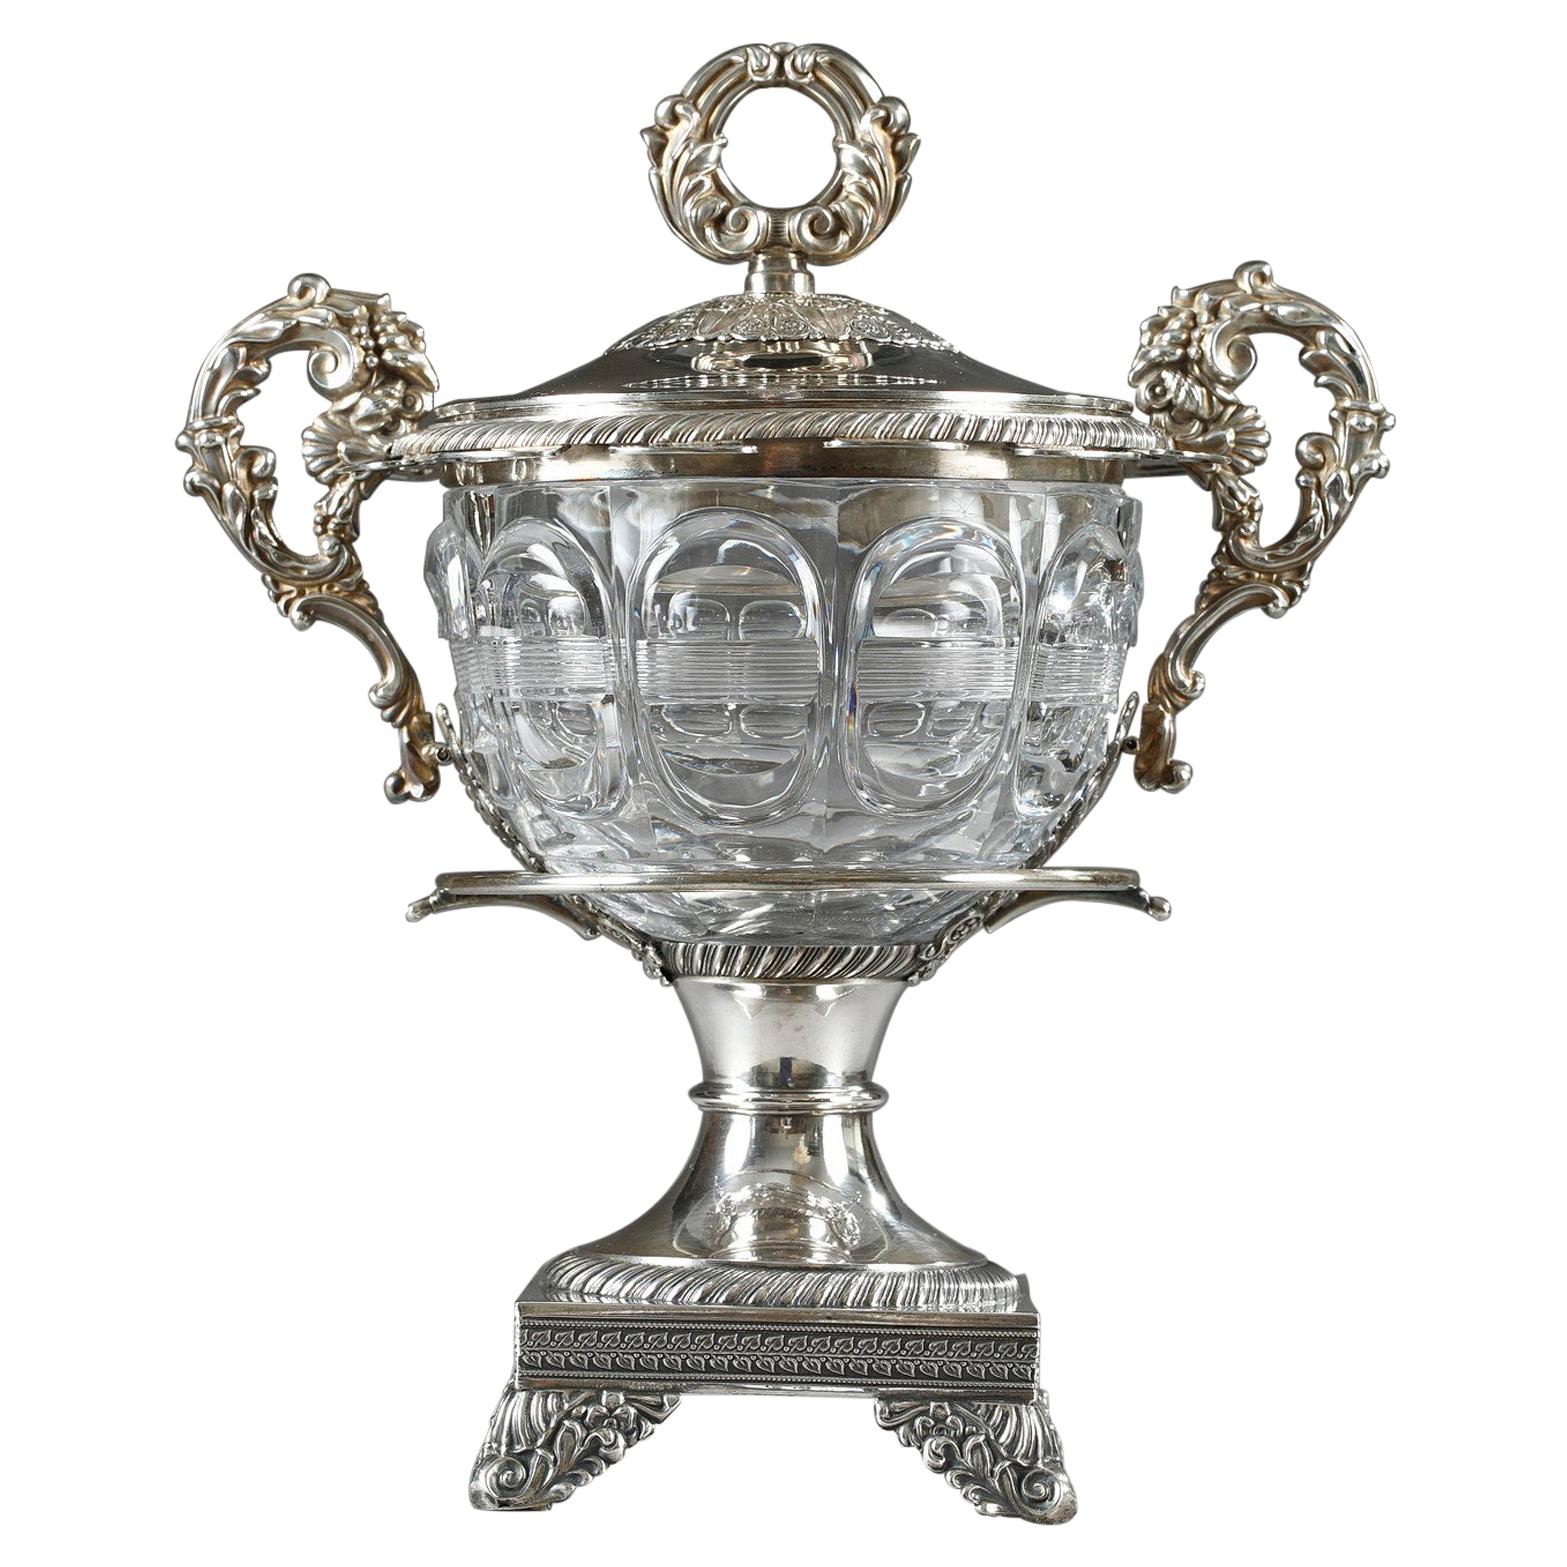 19th Century Large Silver and Cut-Crystal Confiturier, with 12 Spoons